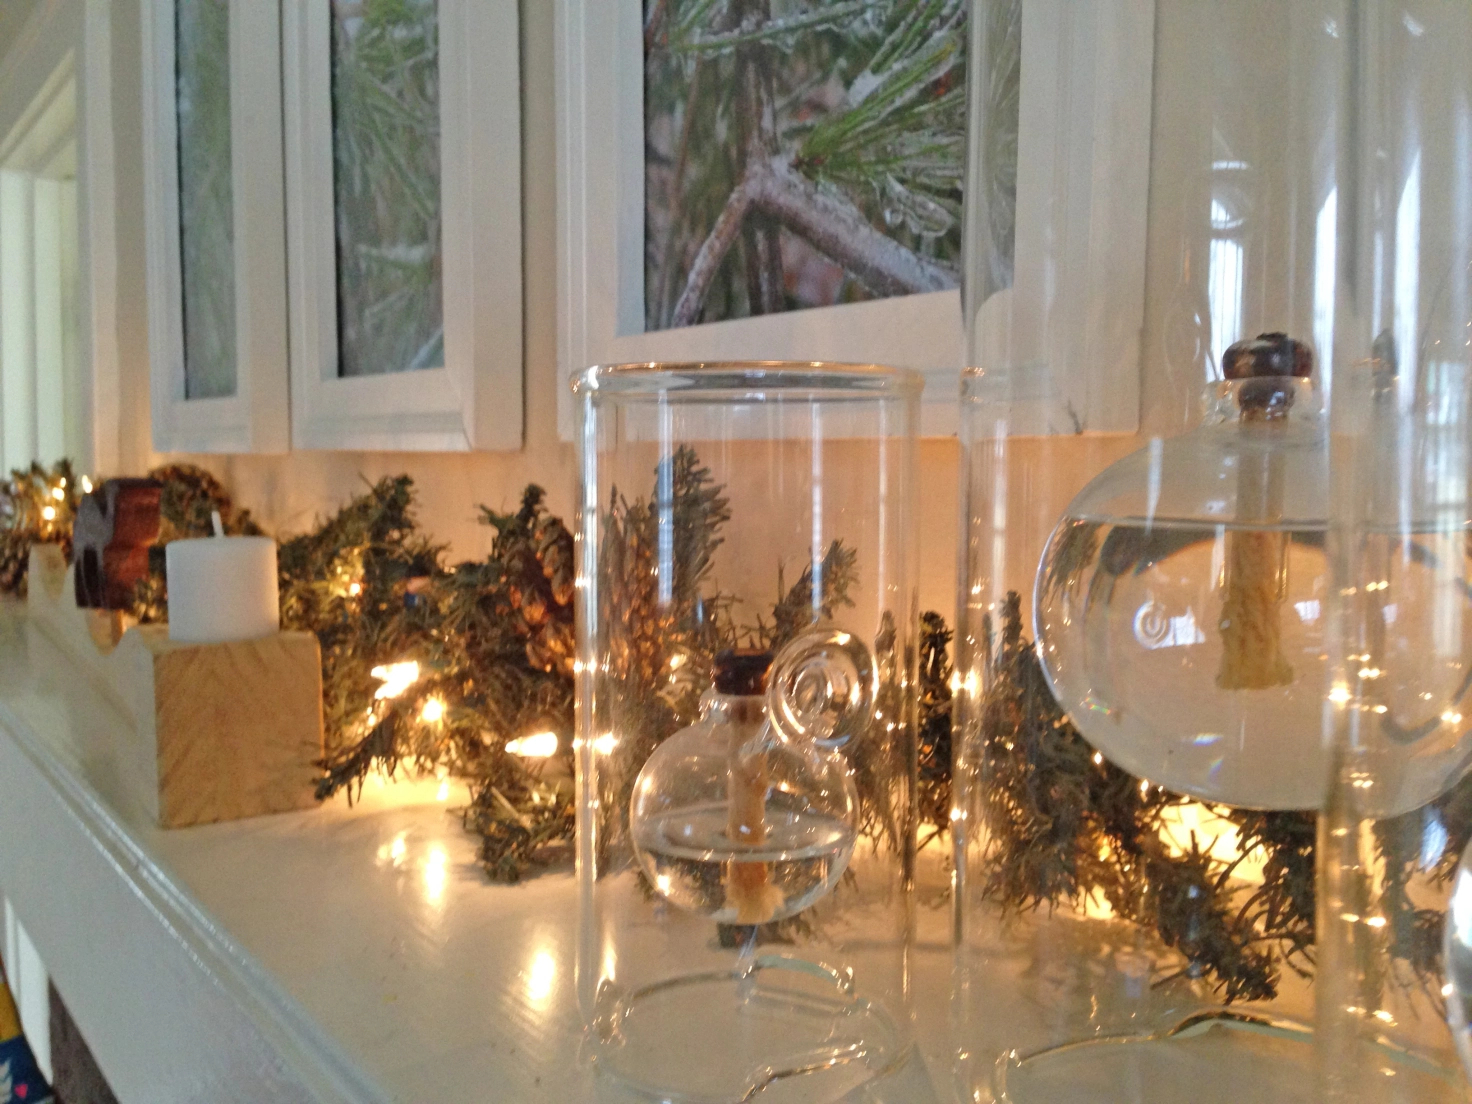 A mantle with three photos of icy pines above it. There is a long garland of fake pine and holiday lights along the top behind several glass lanterns and a wooden candle holder with a camel